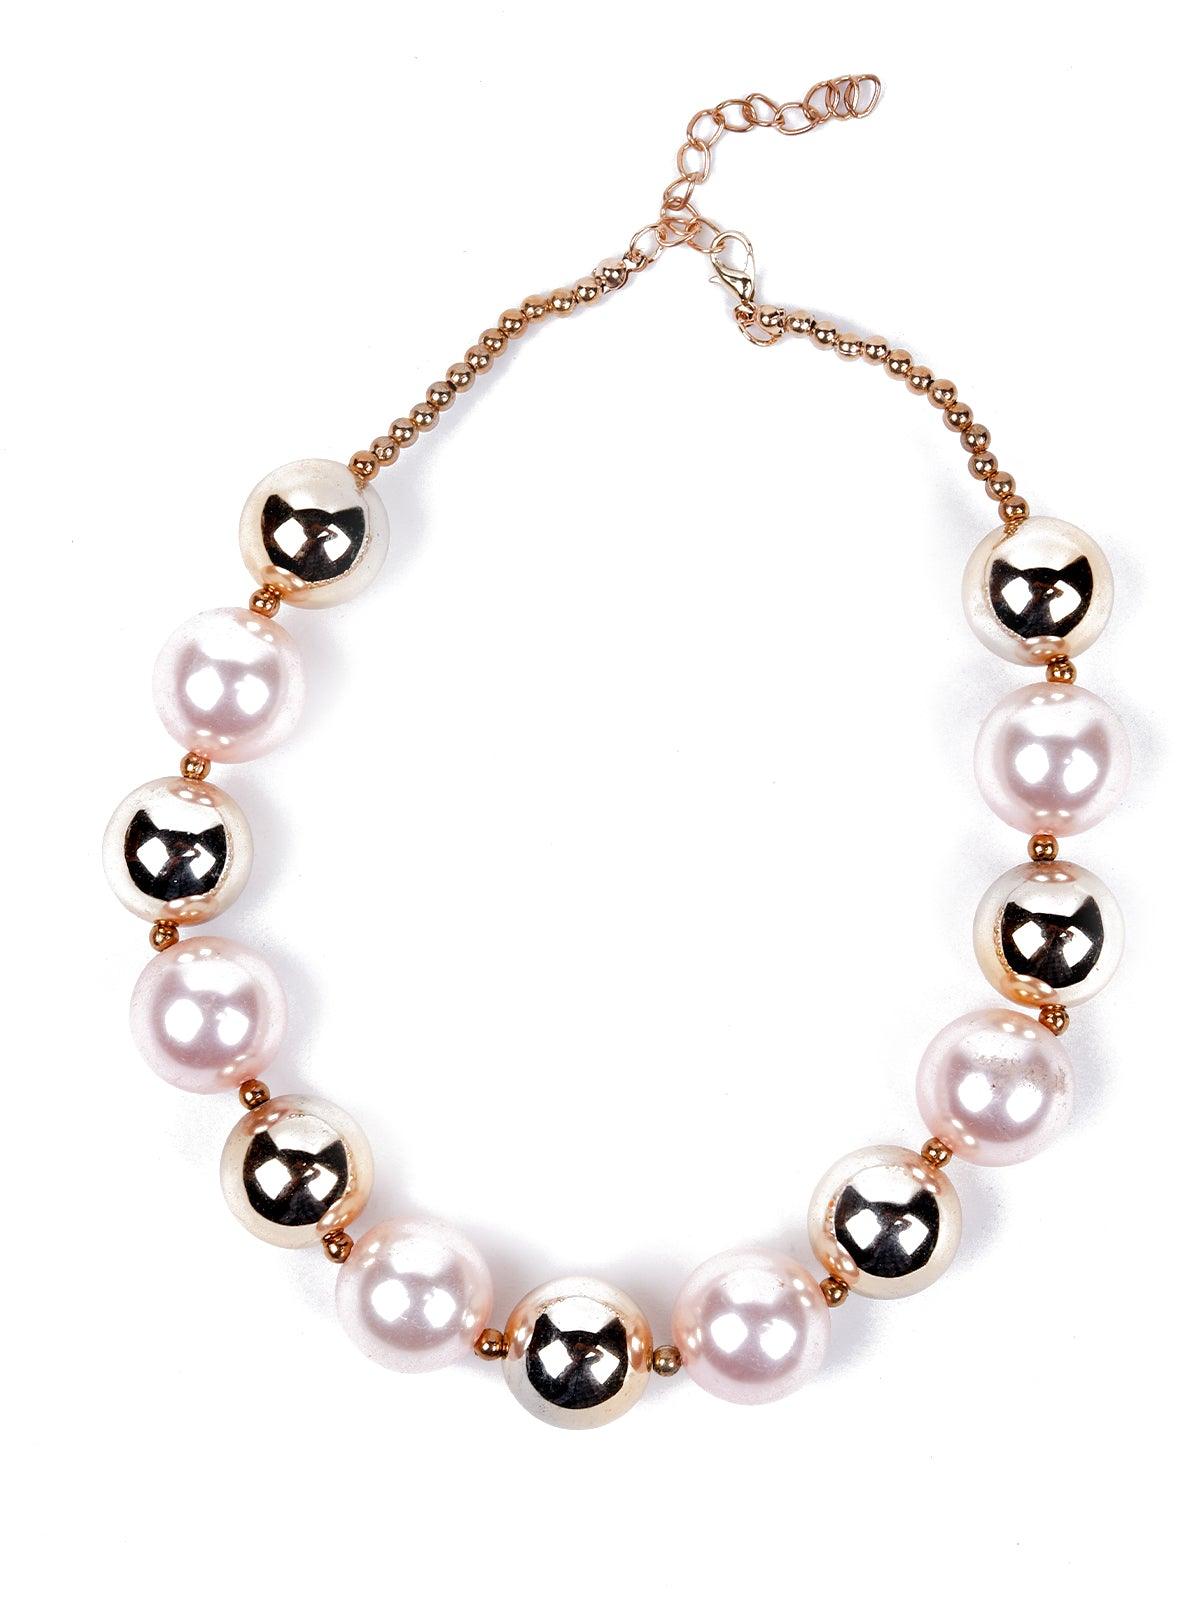 Women's Huge White Beaded Statement Necklace - Odette